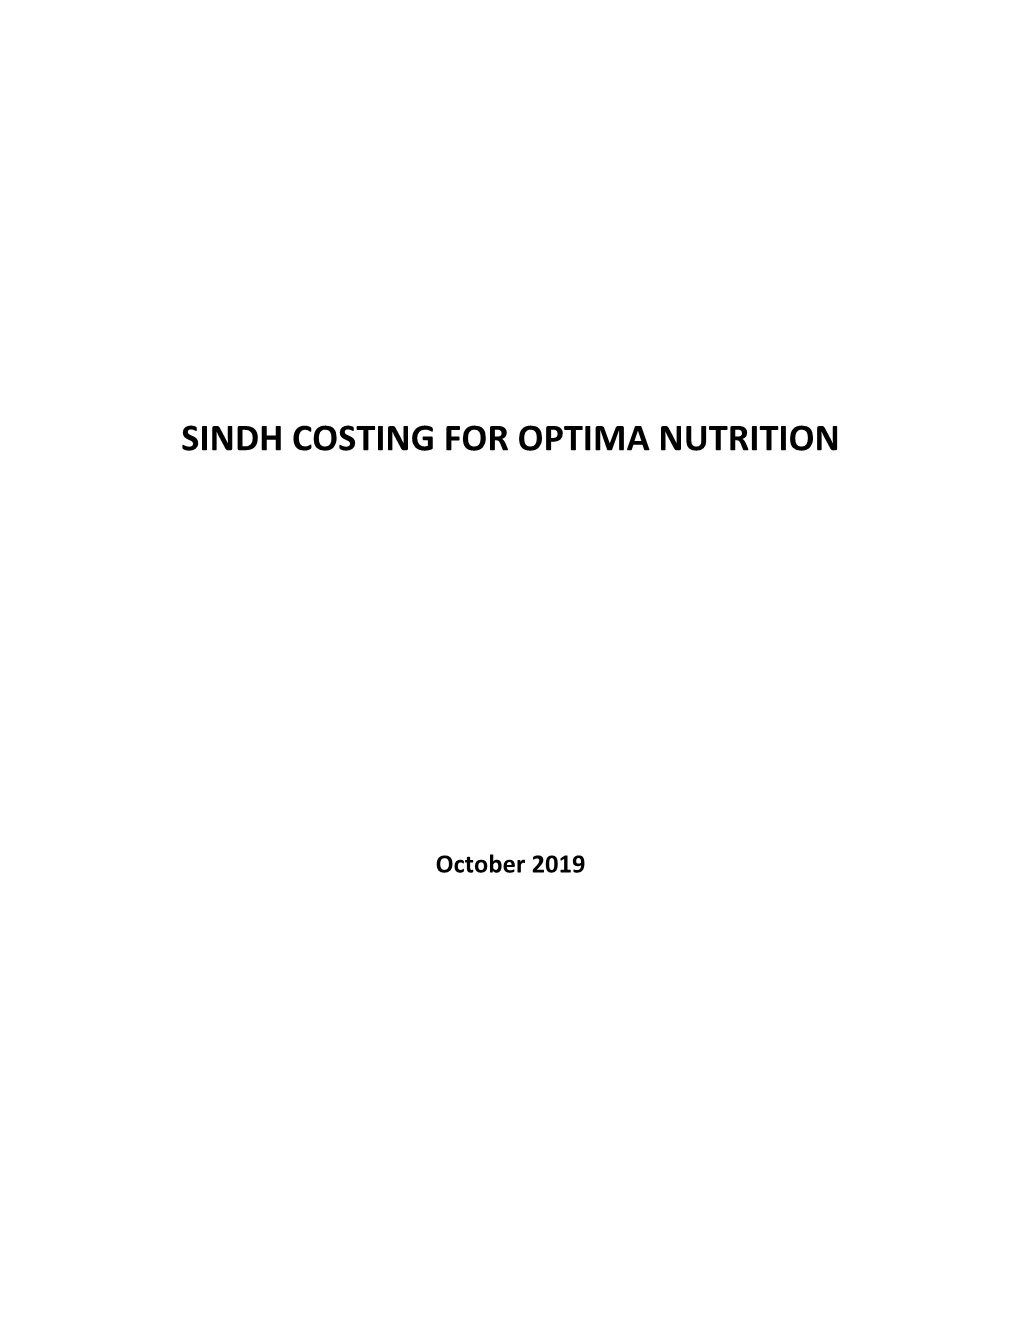 Sindh Costing for Optima Nutrition